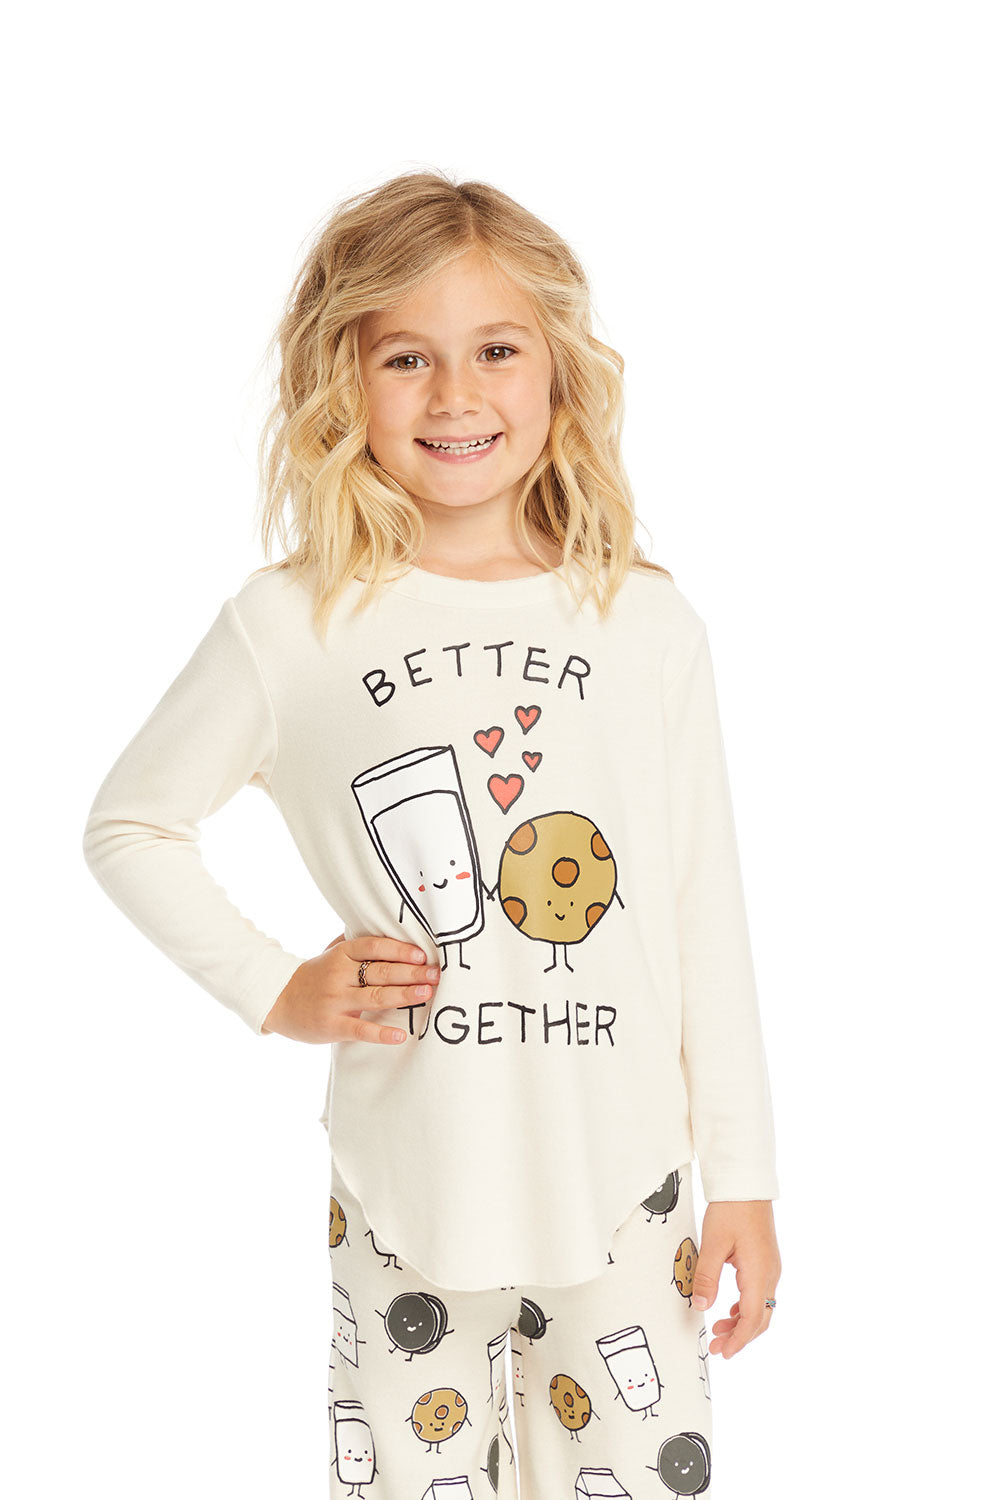 Better Together Cozy Knit Pullover